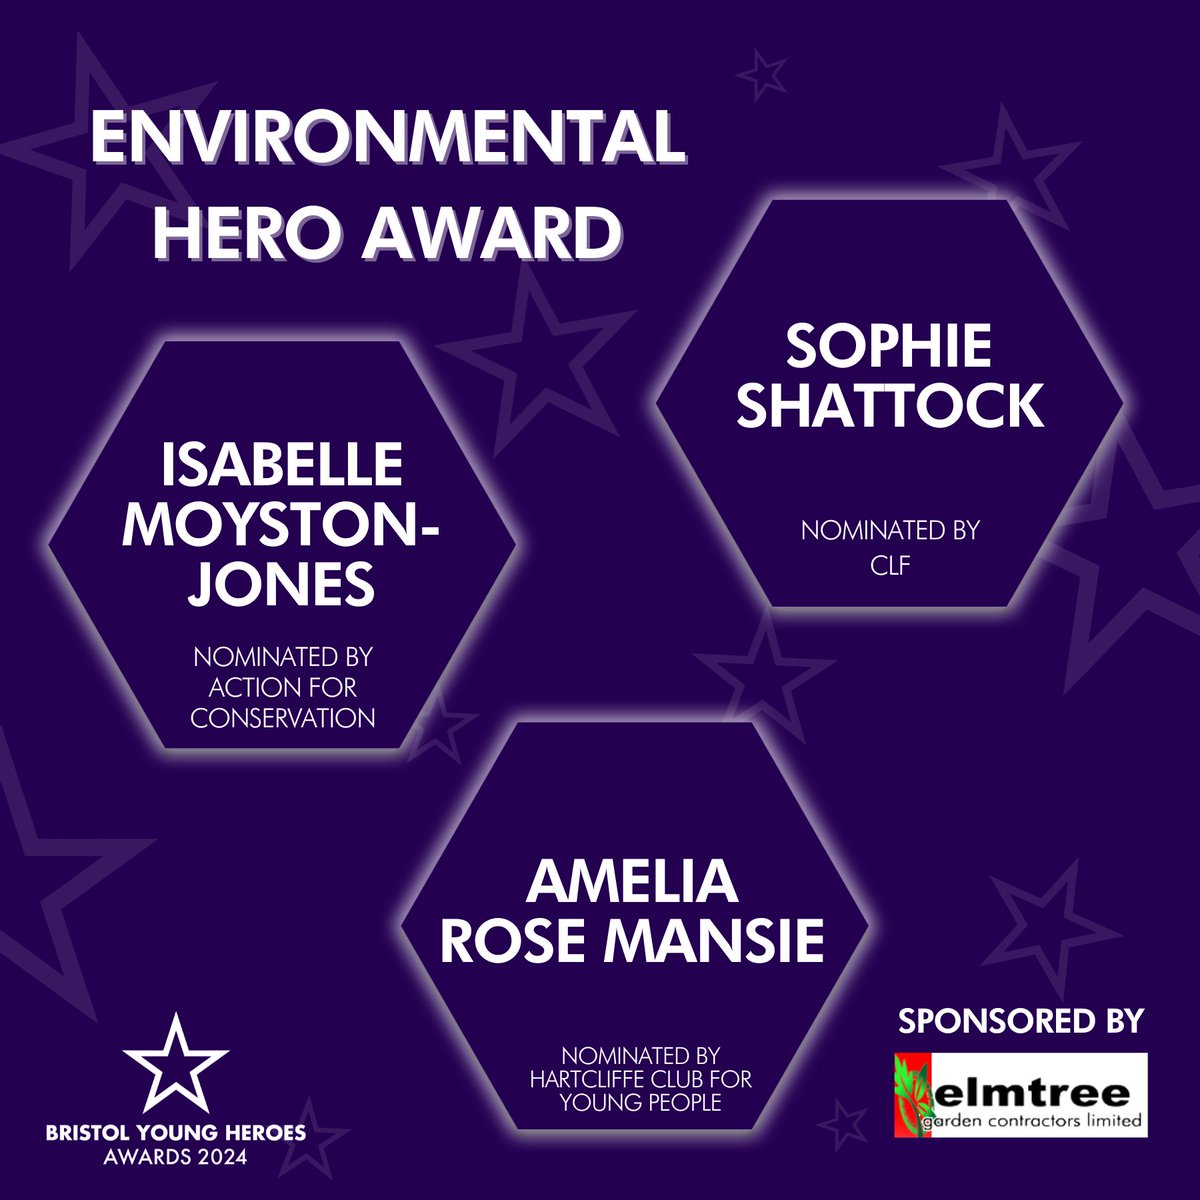 ✨Environmental Hero Award✨ We are thrilled to announce the finalists for the Environmental Hero Award are: 🌟 Isabelle Moyston-Jones 🌟 Sophie Shattock 🌟 Amelia Rose Mansie Congratulations and good luck 🤞 Thank you to @elmtree_garden for sponsoring this award 🙏